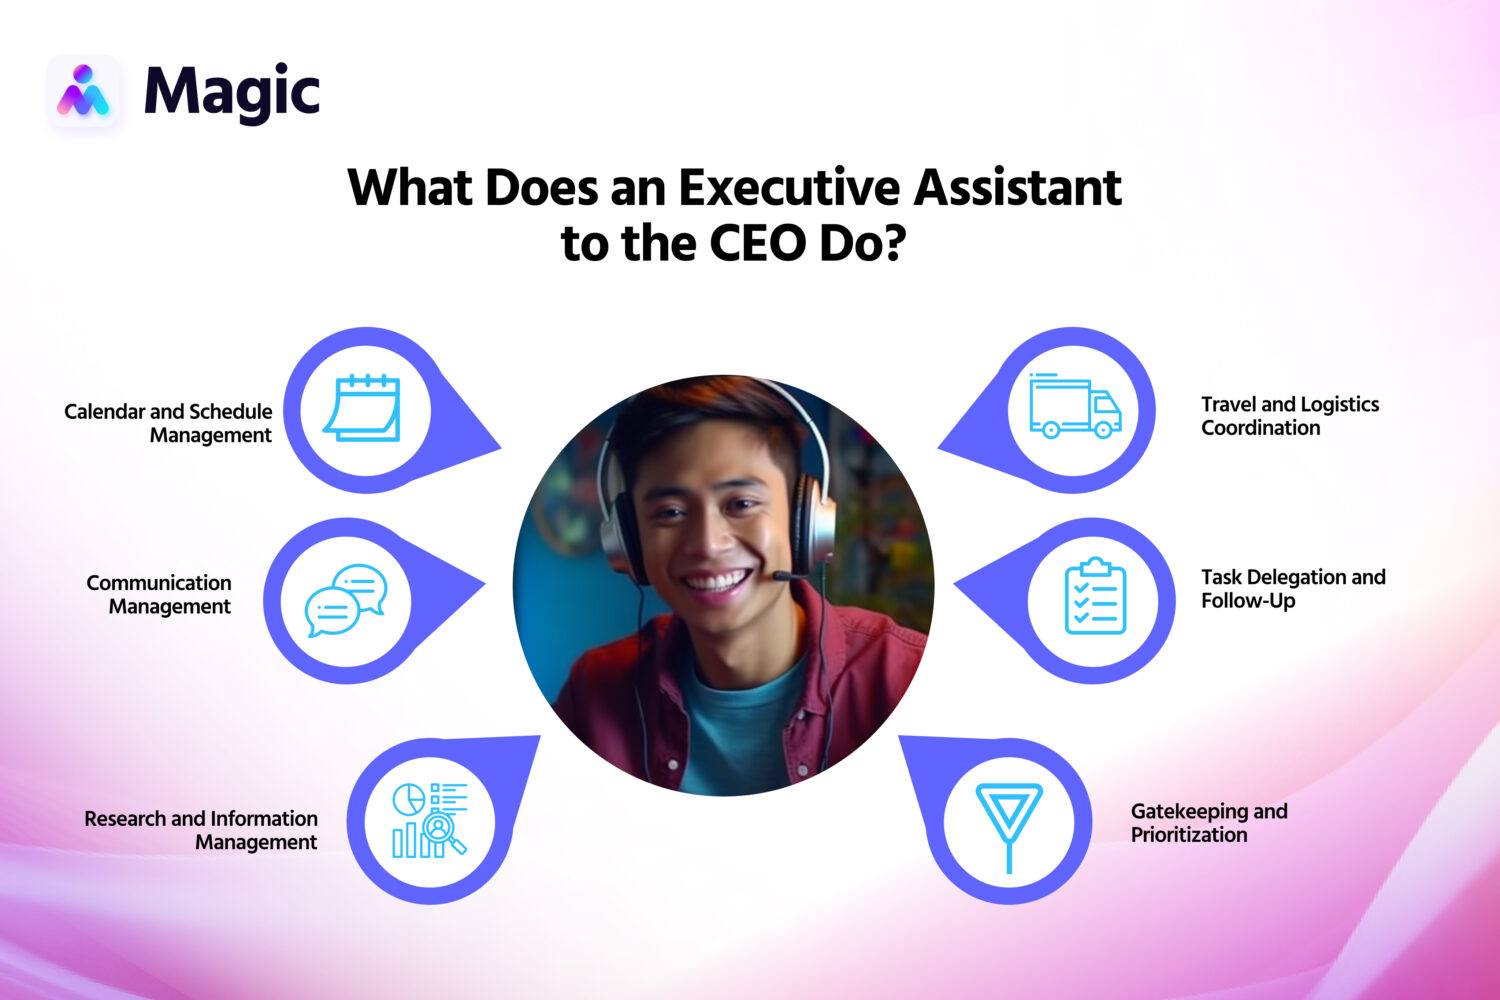 What Does an Executive Assistant to the CEO Do